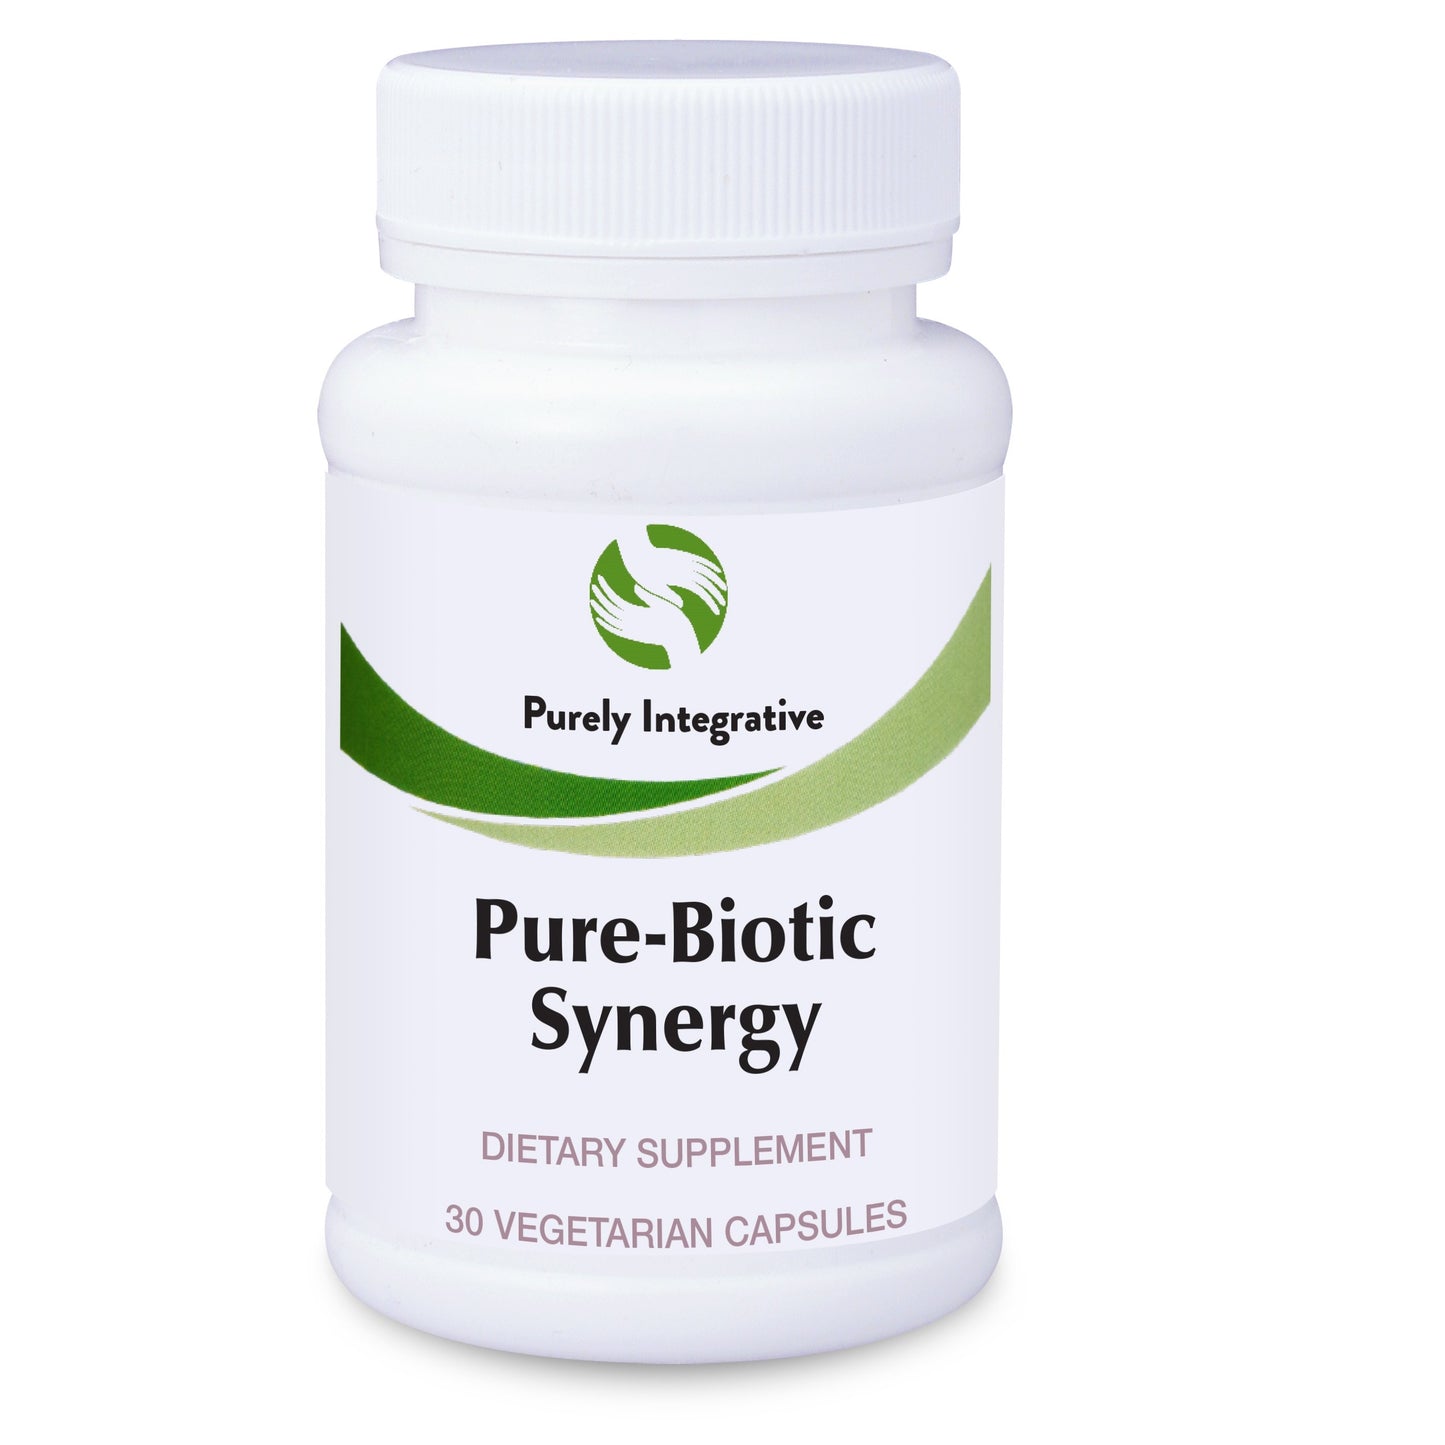 Pure-Biotic Synergy